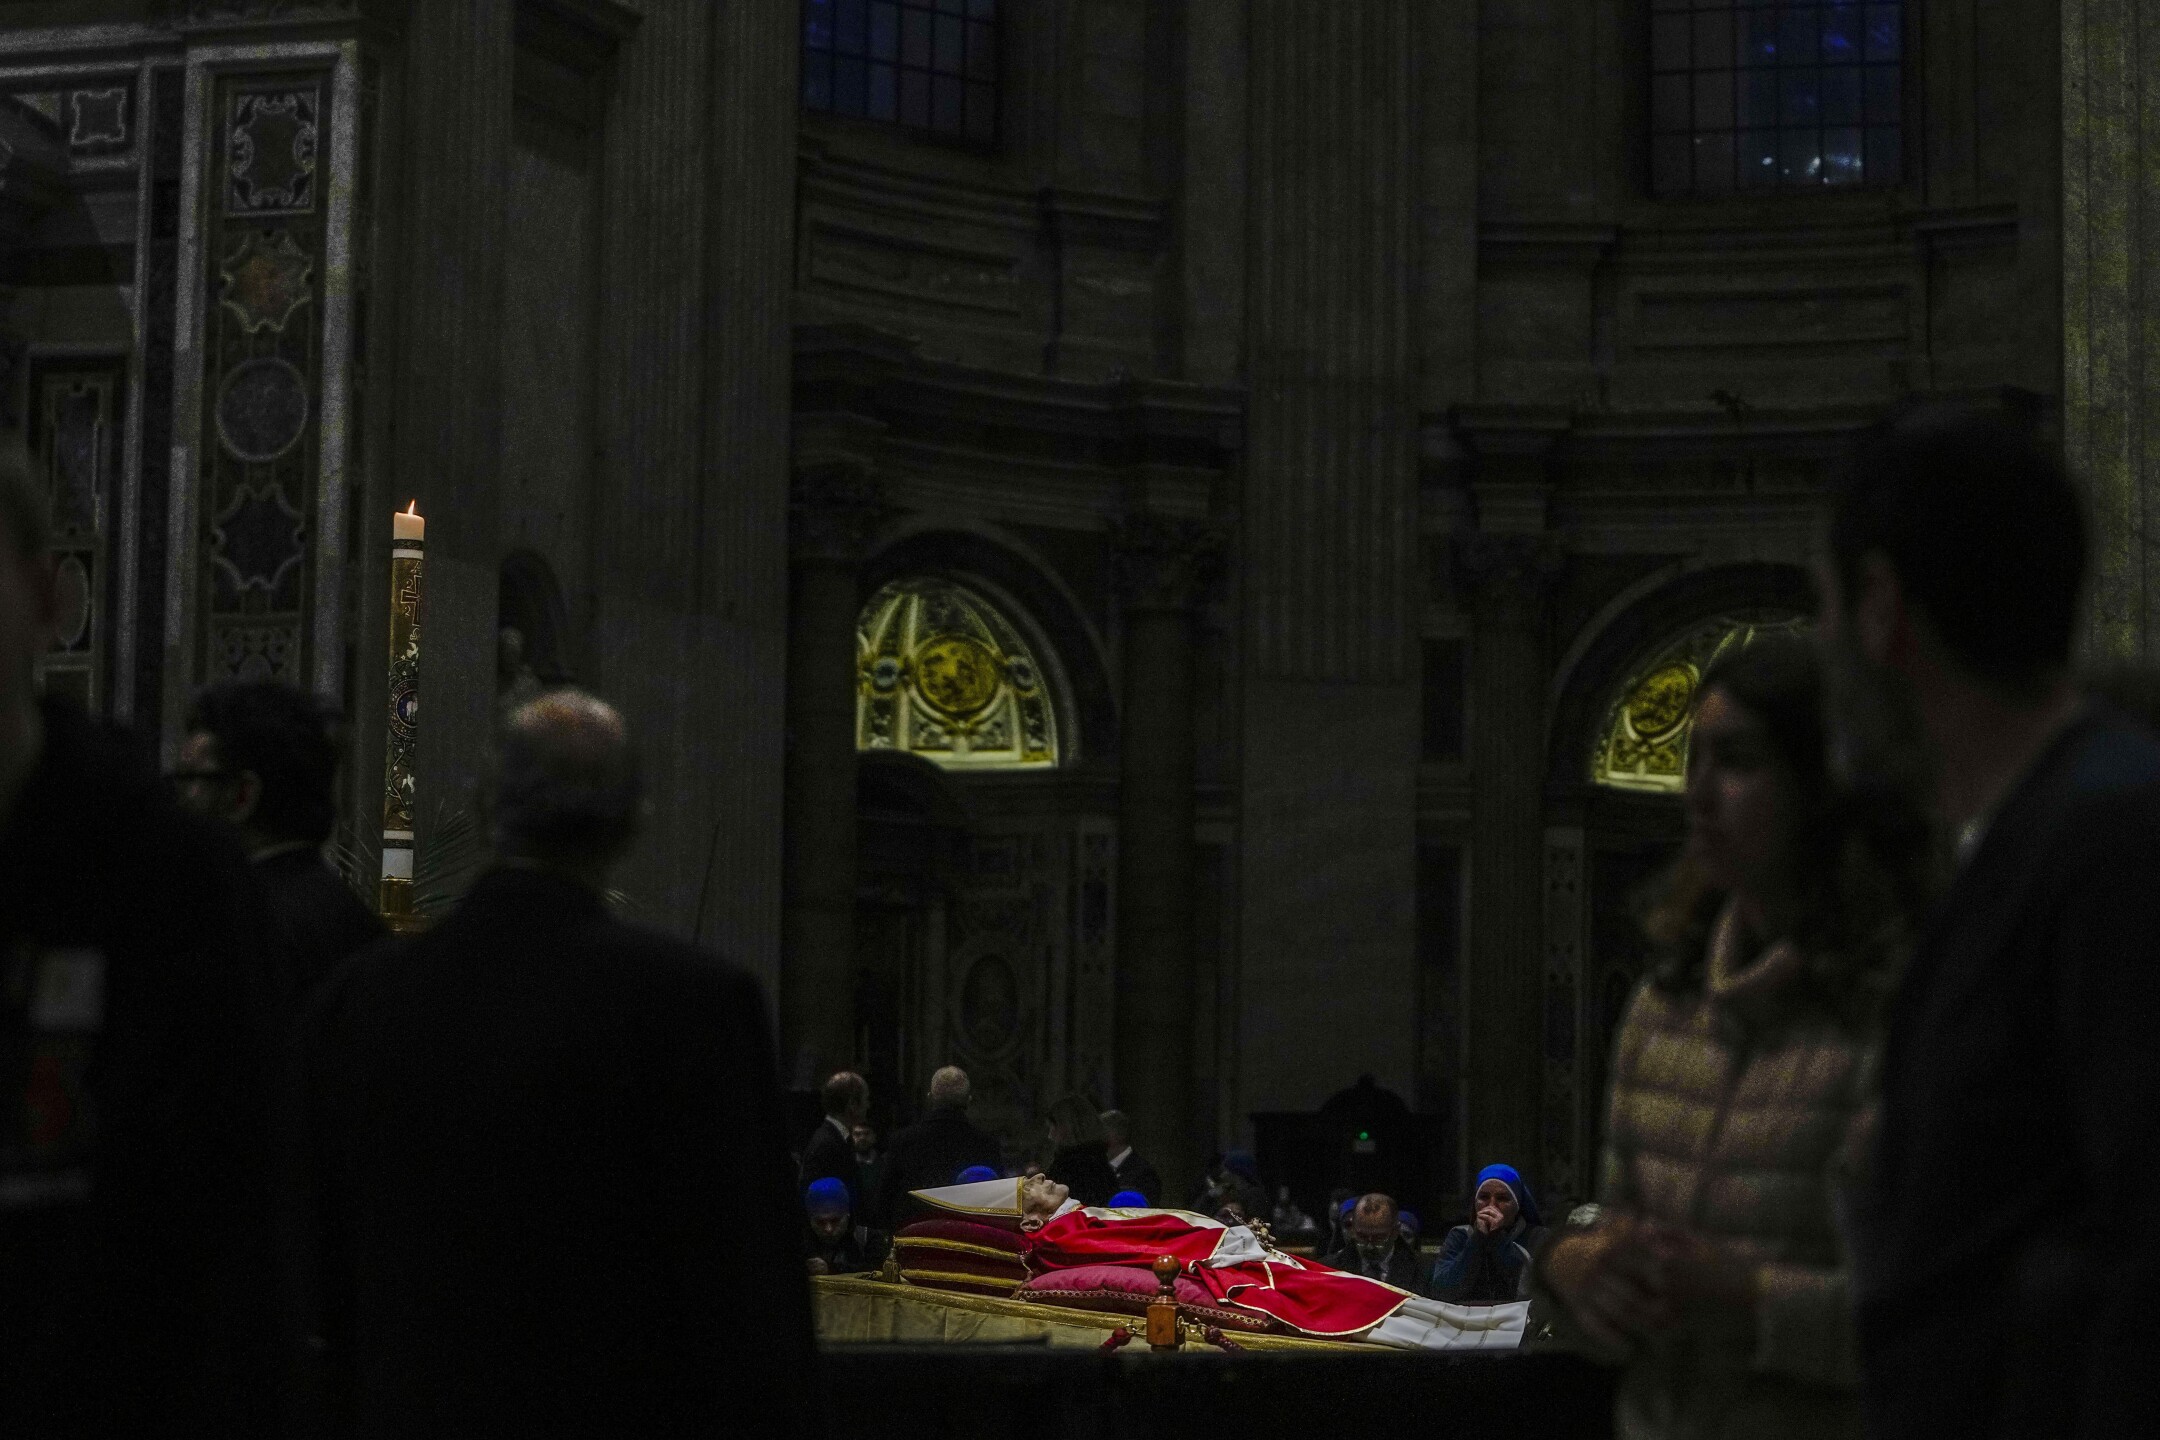 The body of the late Pope Emeritus Benedict XVI lies in state in St. Peter's Basilica at the Vatican, as mourners file by to pay tribute, on Jan. 4, 2023. Benedict died Dec. 31, 2022. He was 95. (AP Photo/Alessandra Tarantino)